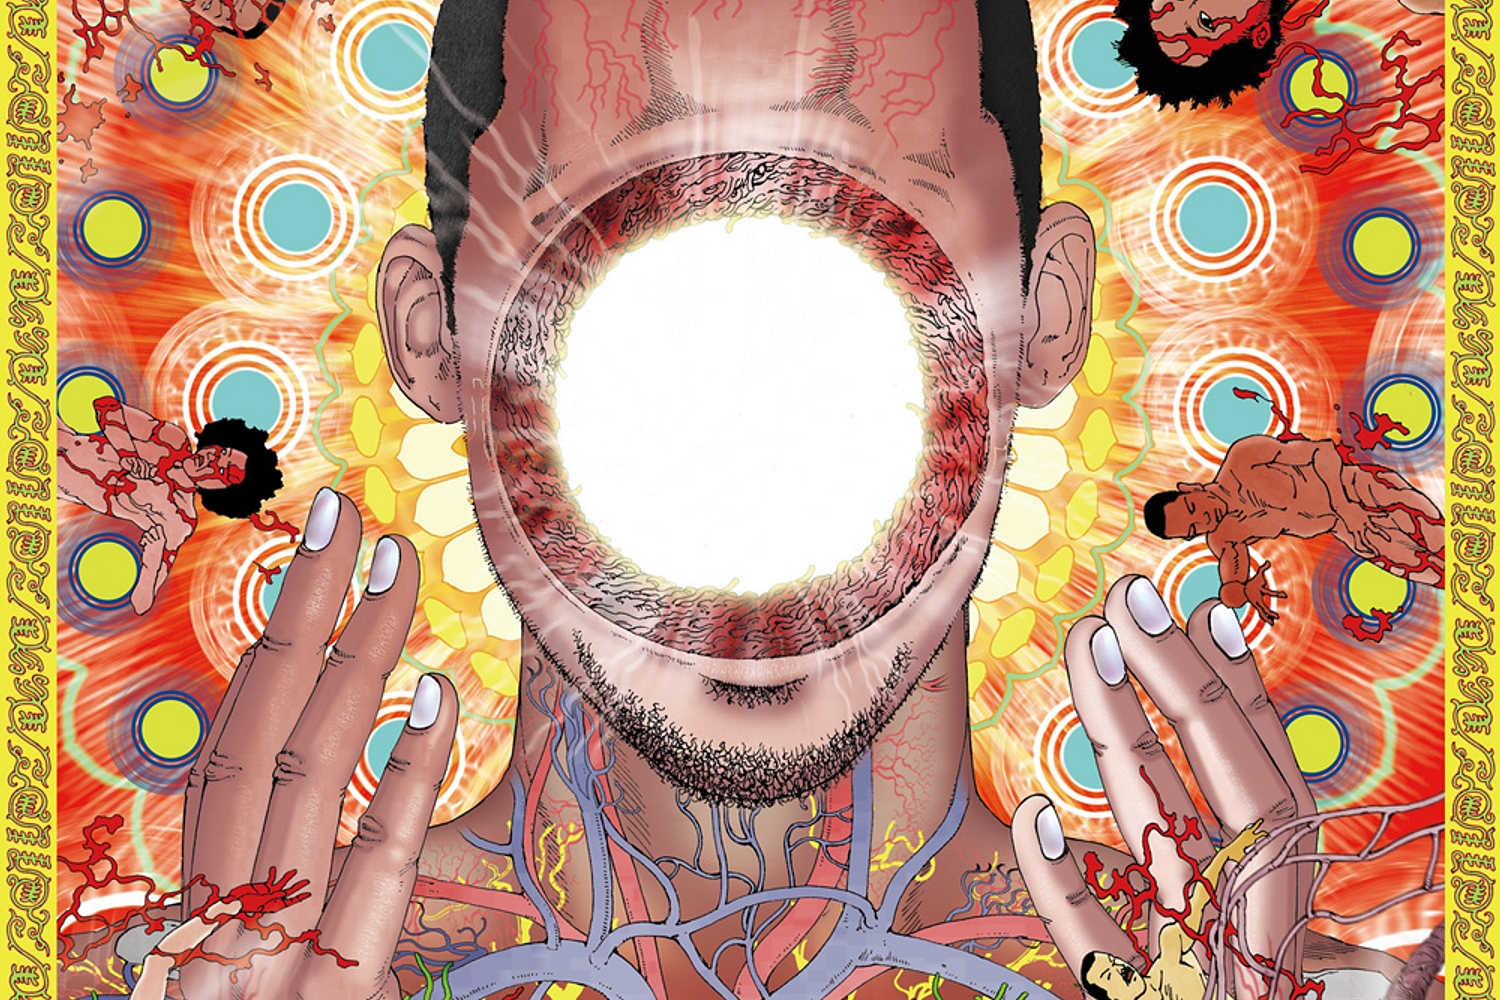 Flying Lotus - You’re Dead